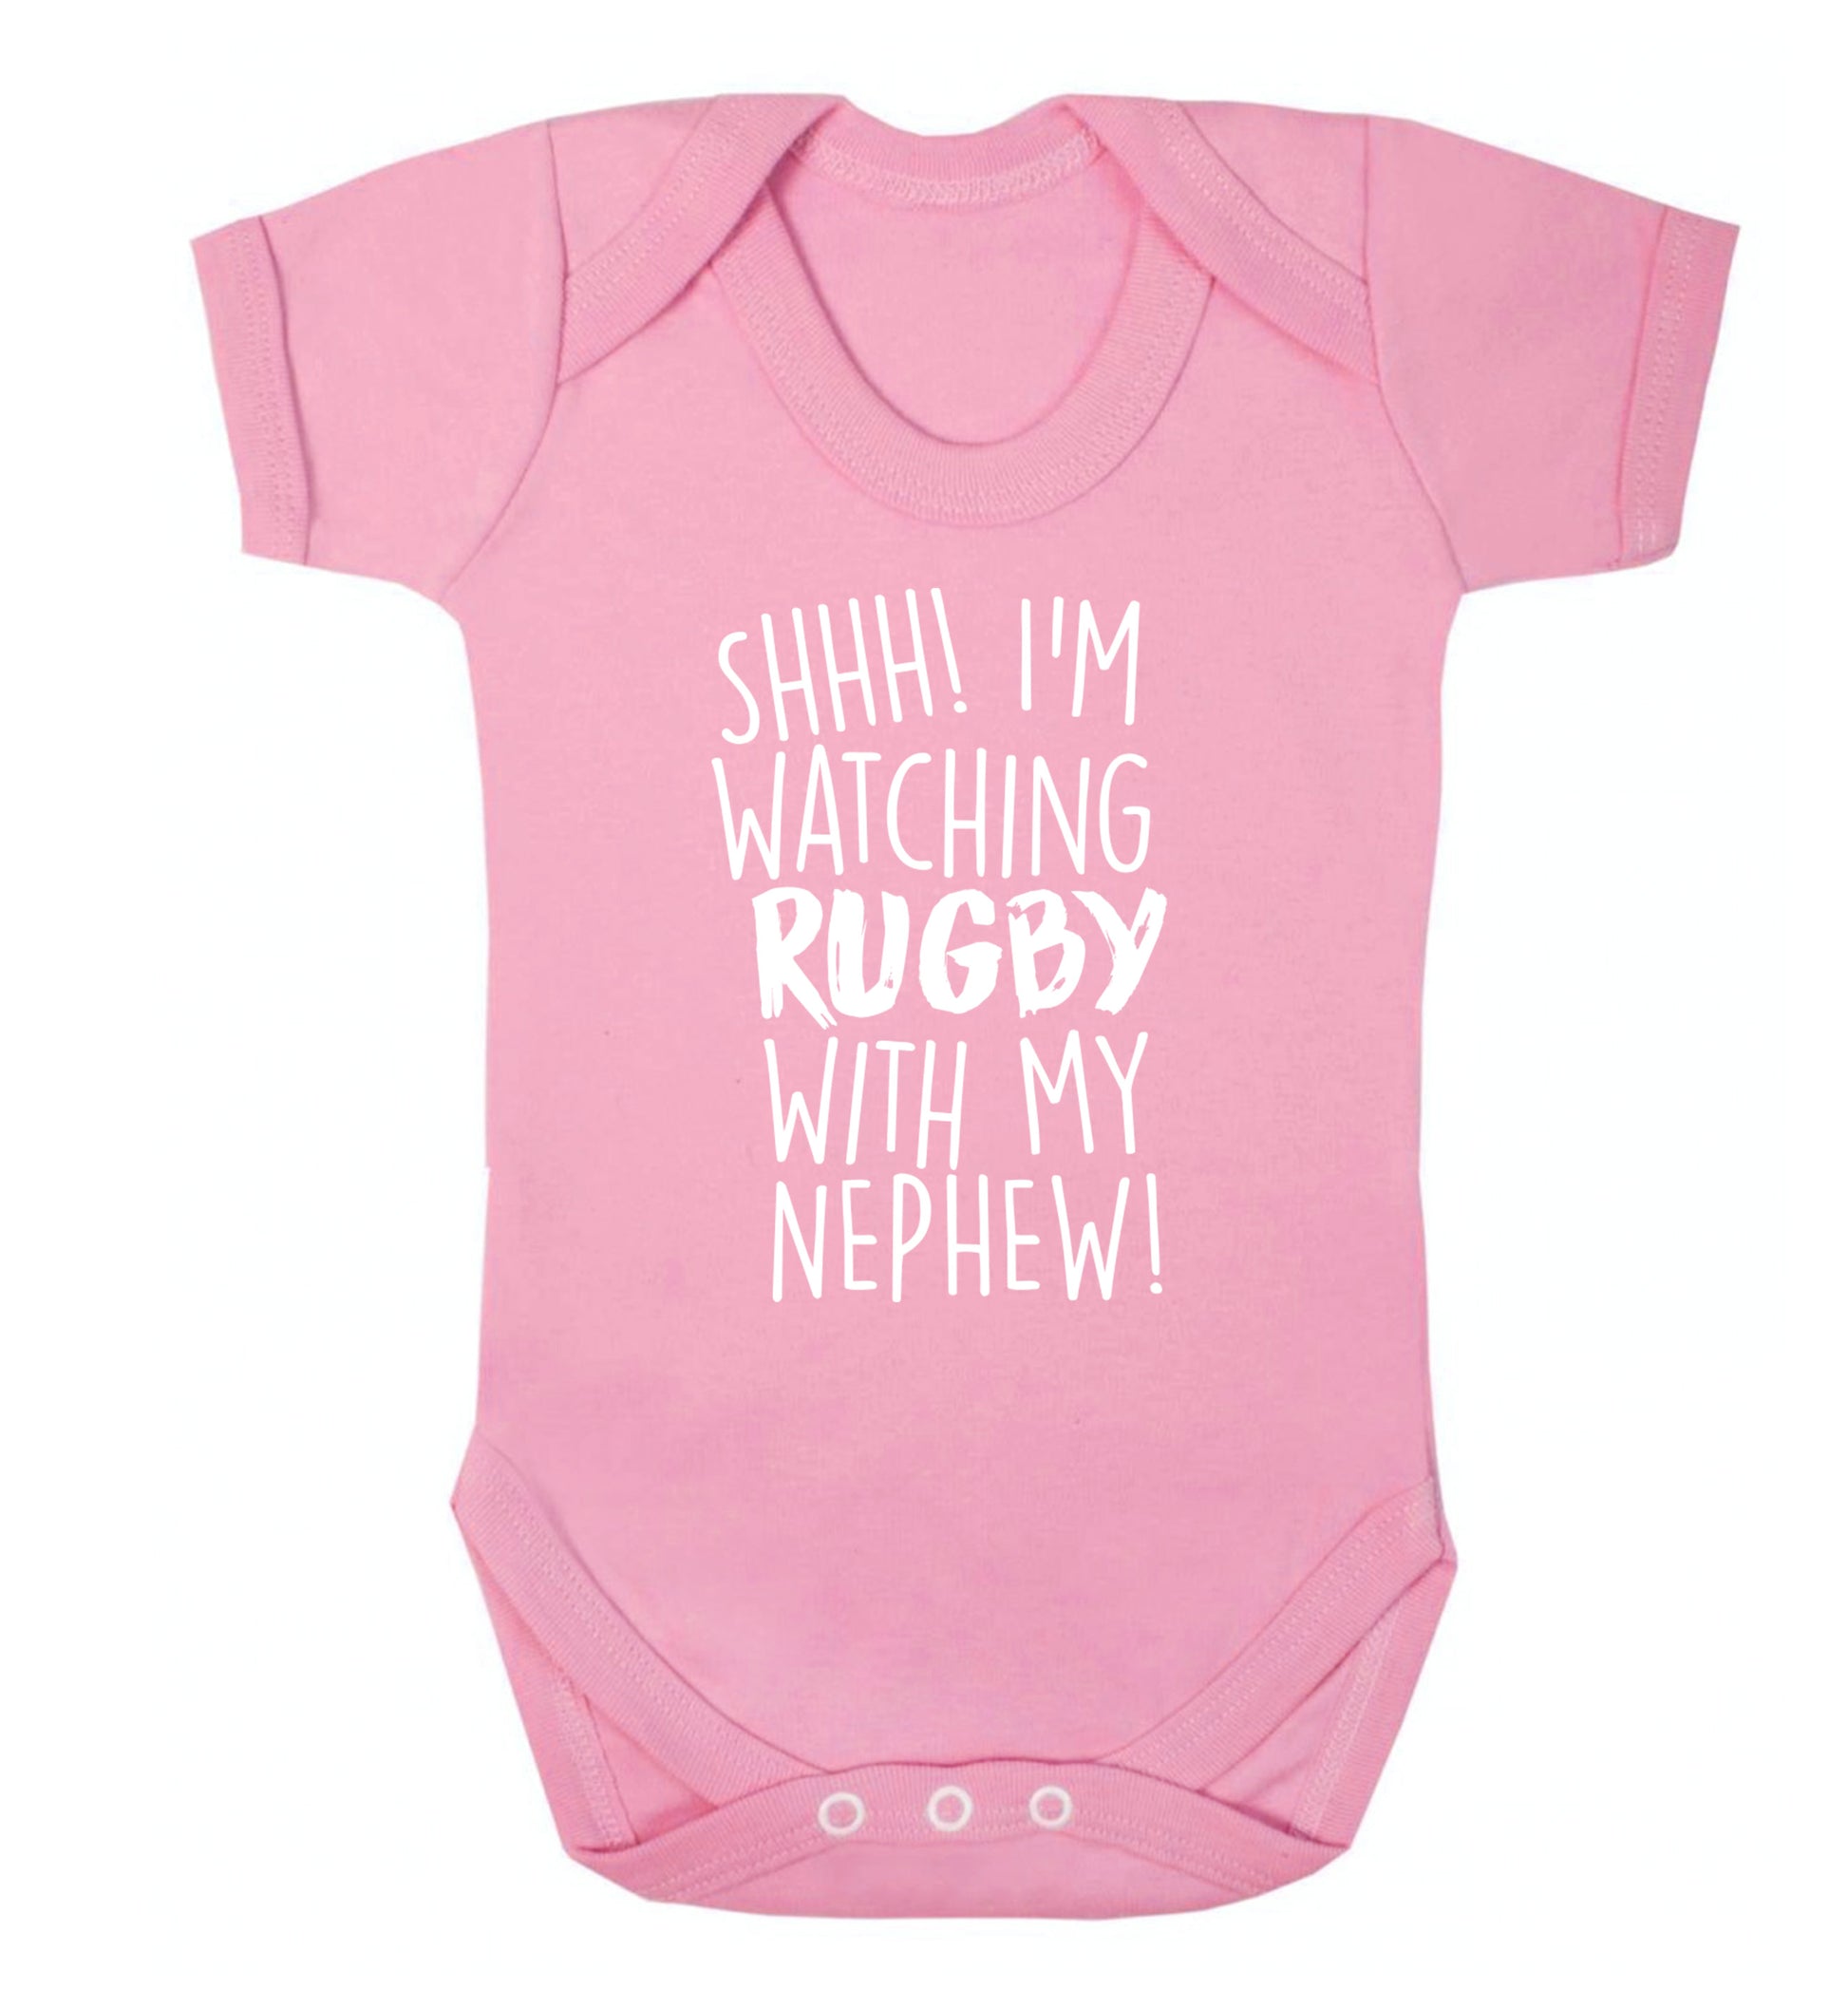 Shh.. I'm watching rugby with my nephew Baby Vest pale pink 18-24 months